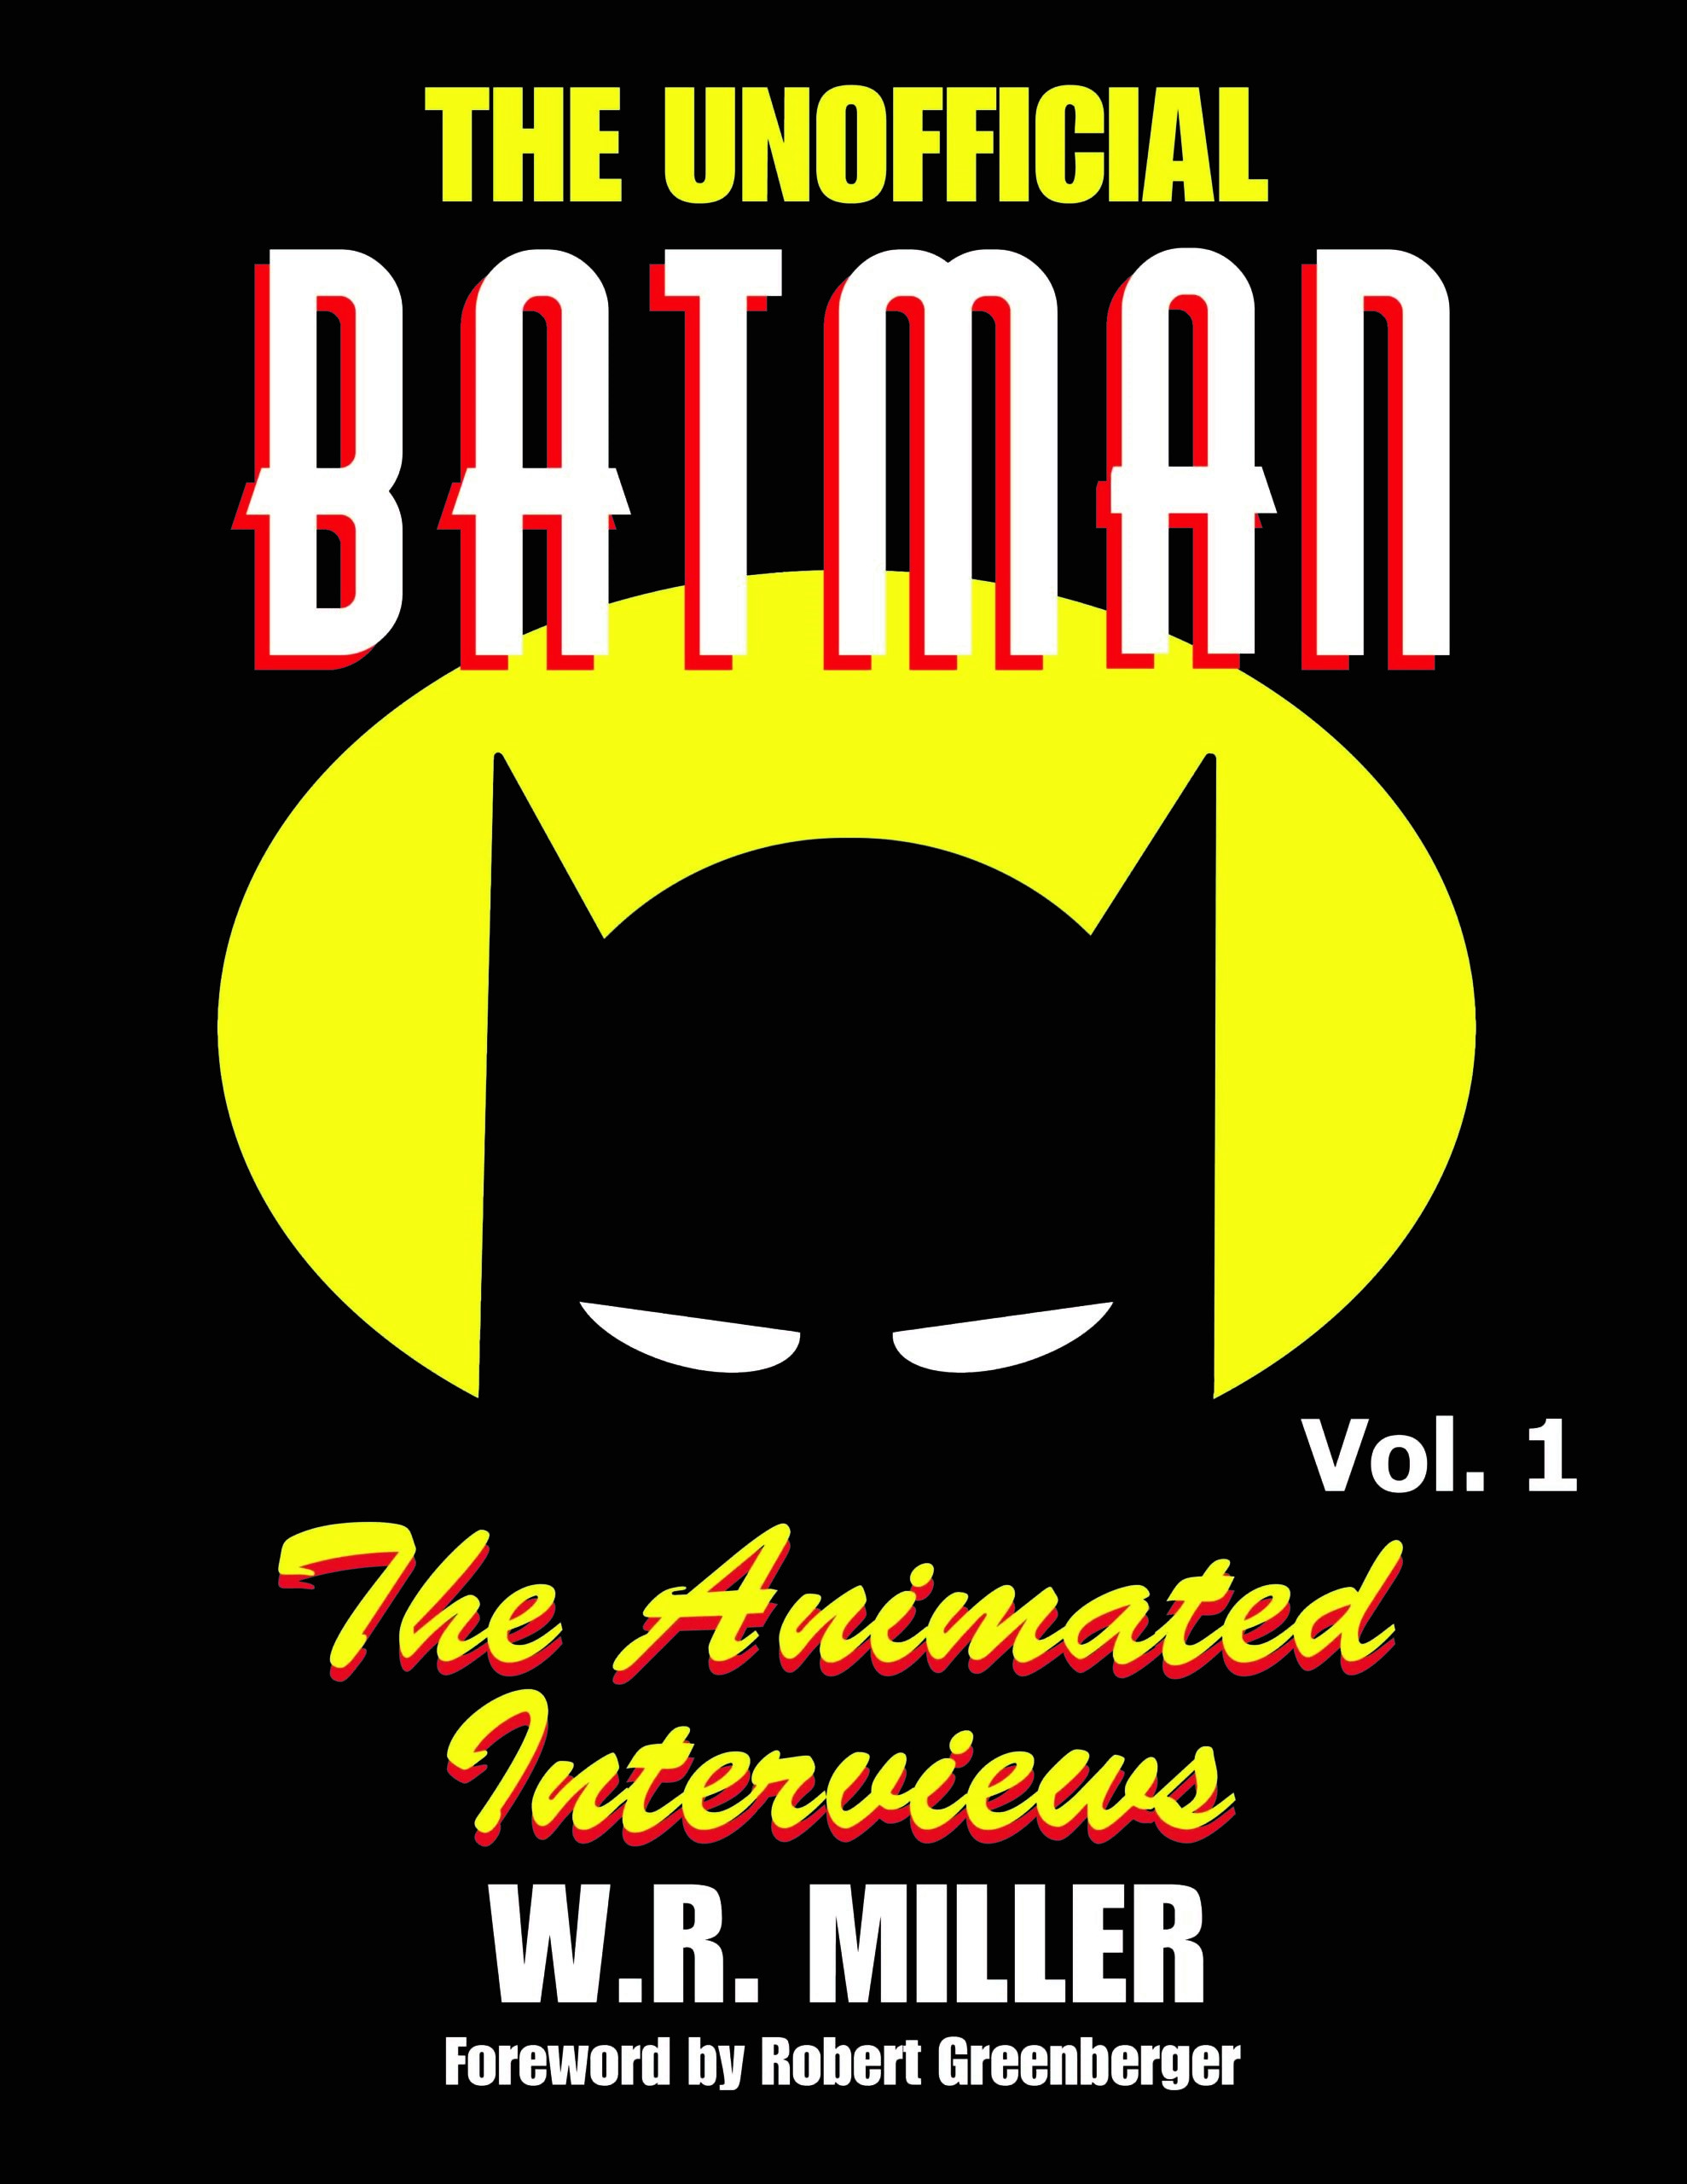 The Unofficial Batman: The Animated Interviews by W.R. Miller